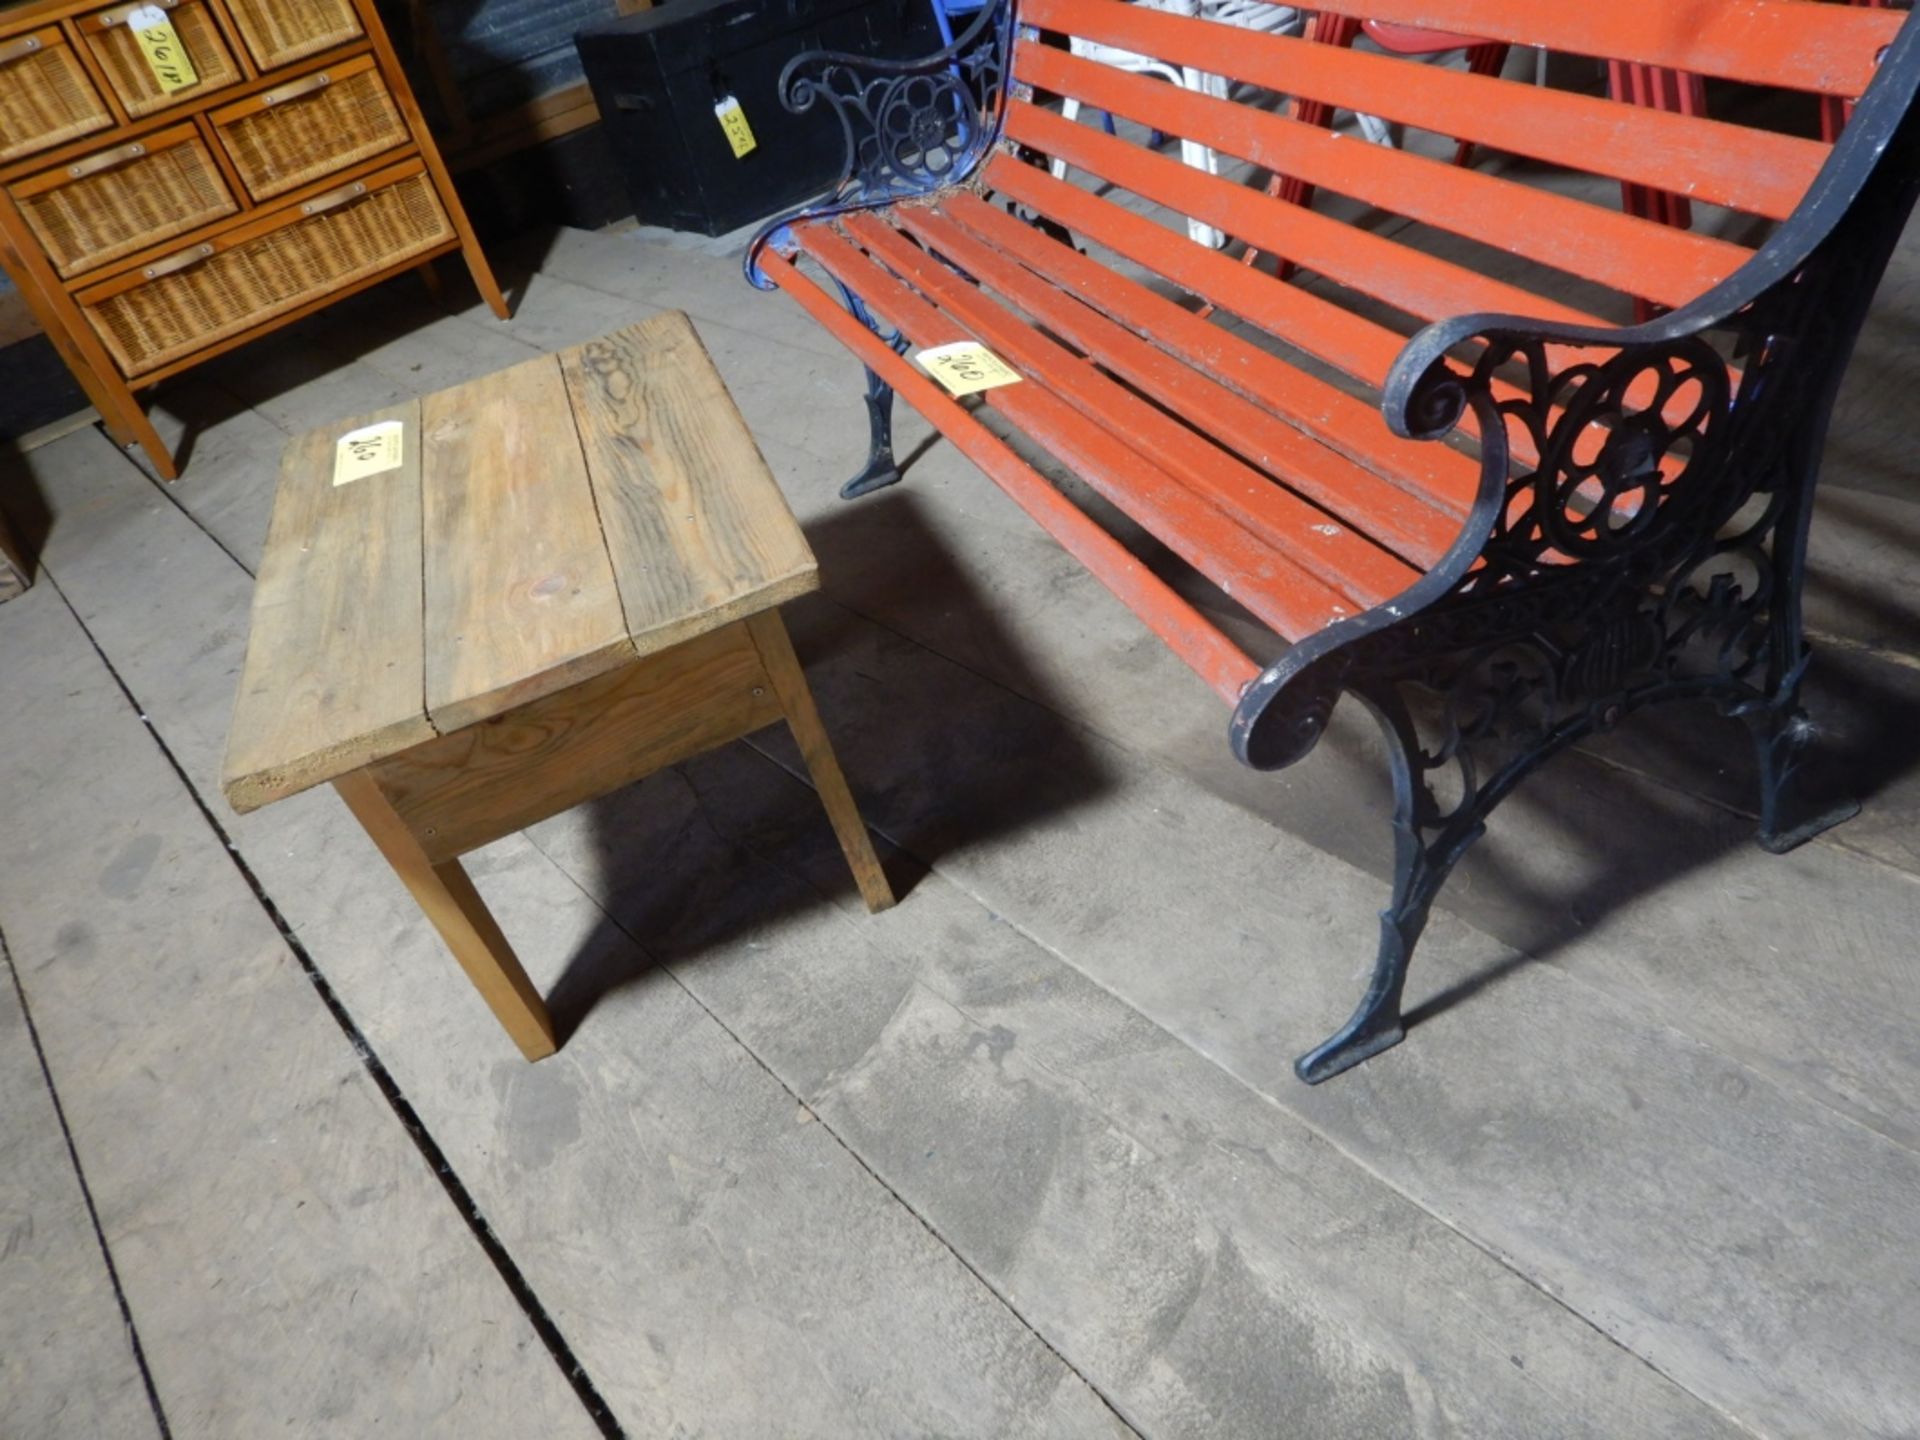 PARK/PATIO 50" WOOD & STEEL BENCH, 17"X28" WOOD TABLE - Image 2 of 2